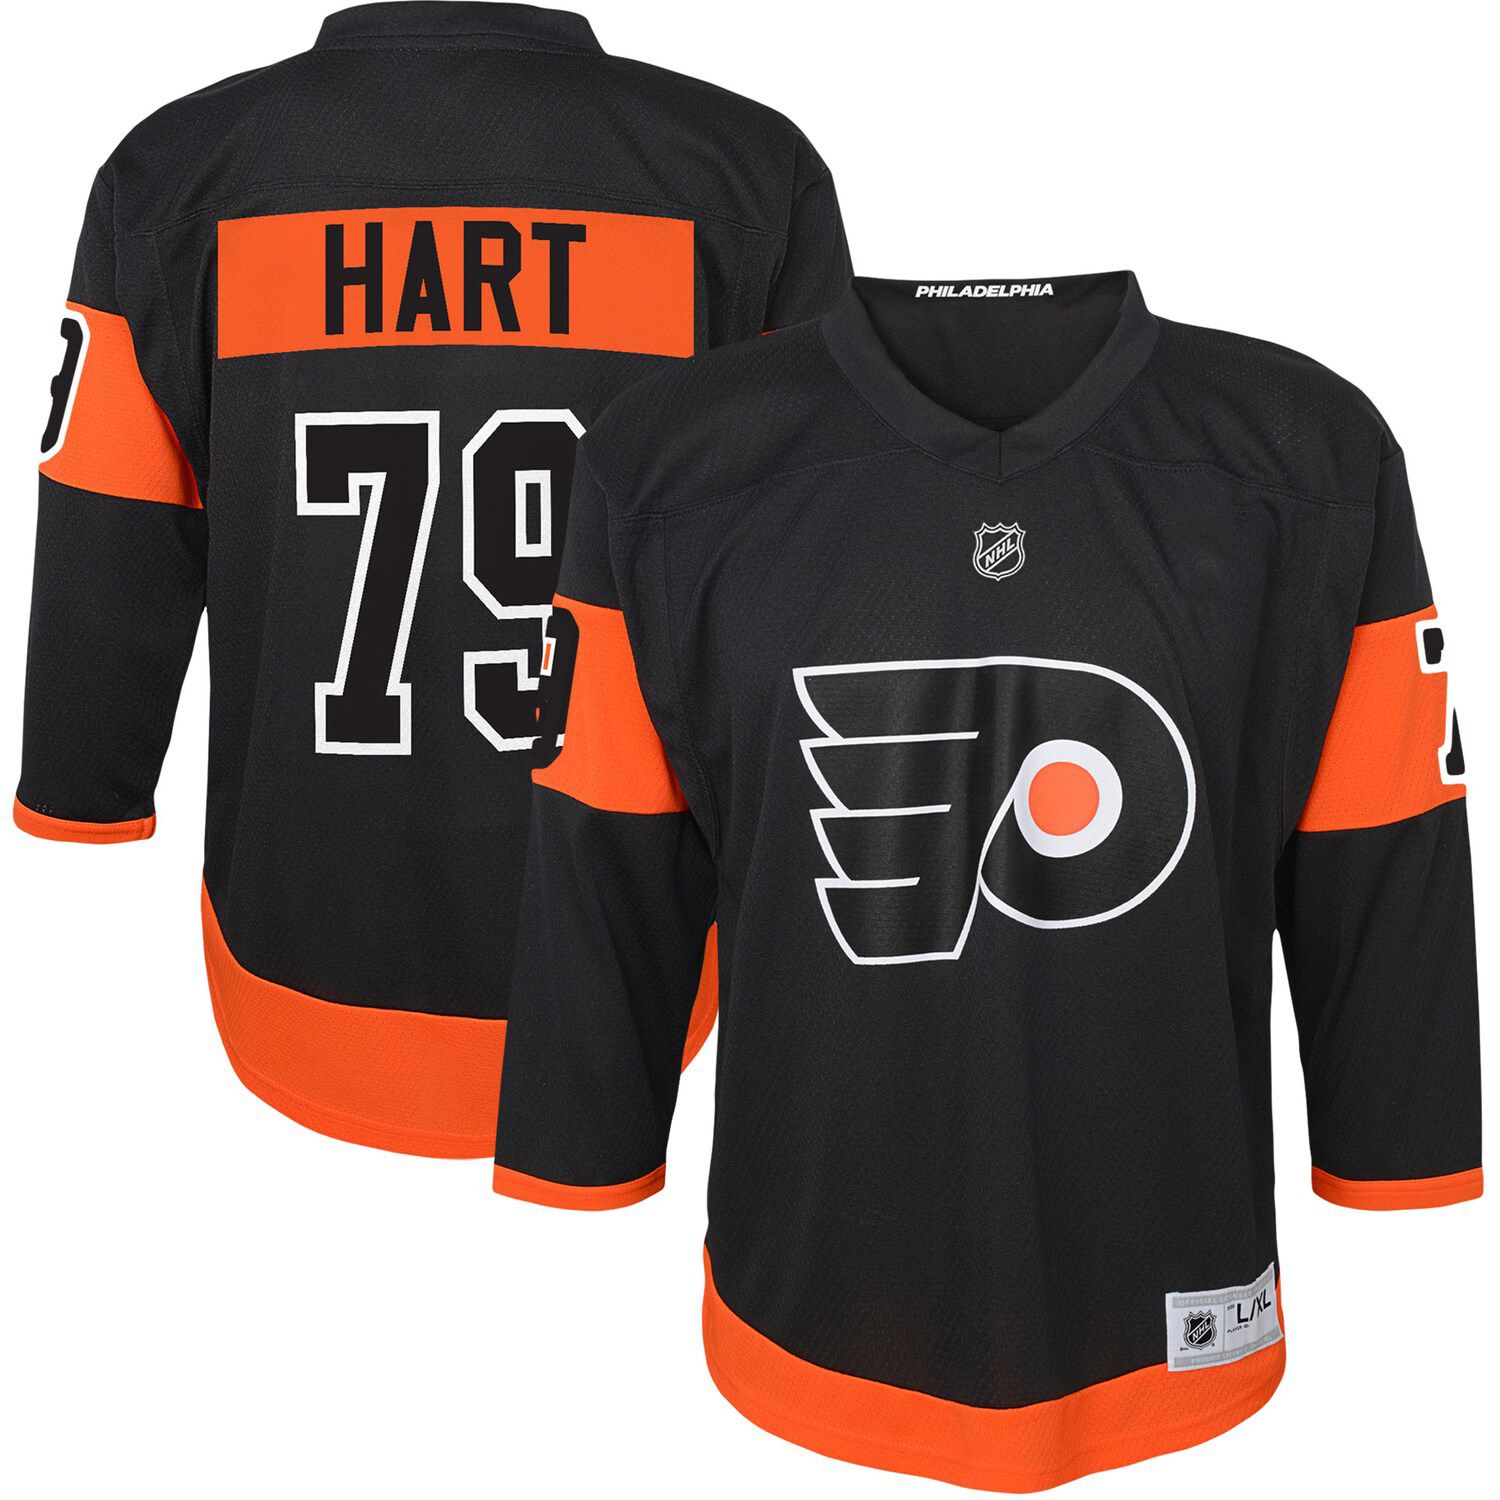 carter hart youth jersey